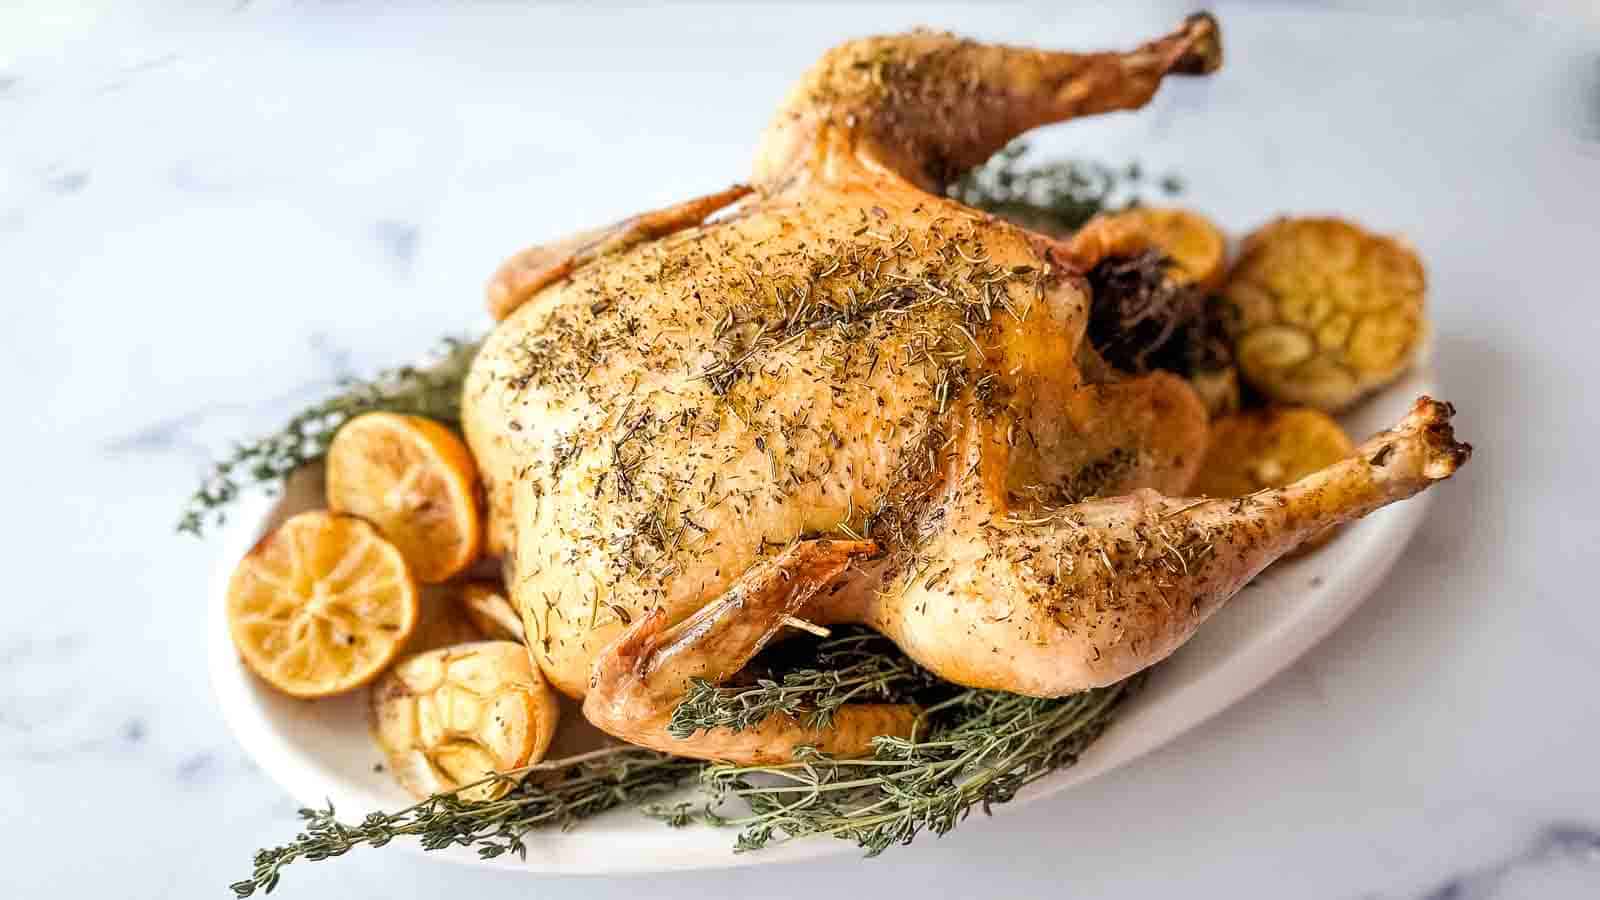 Roasted herbes de provence chicken with thyme and lemon slices on a white plate.